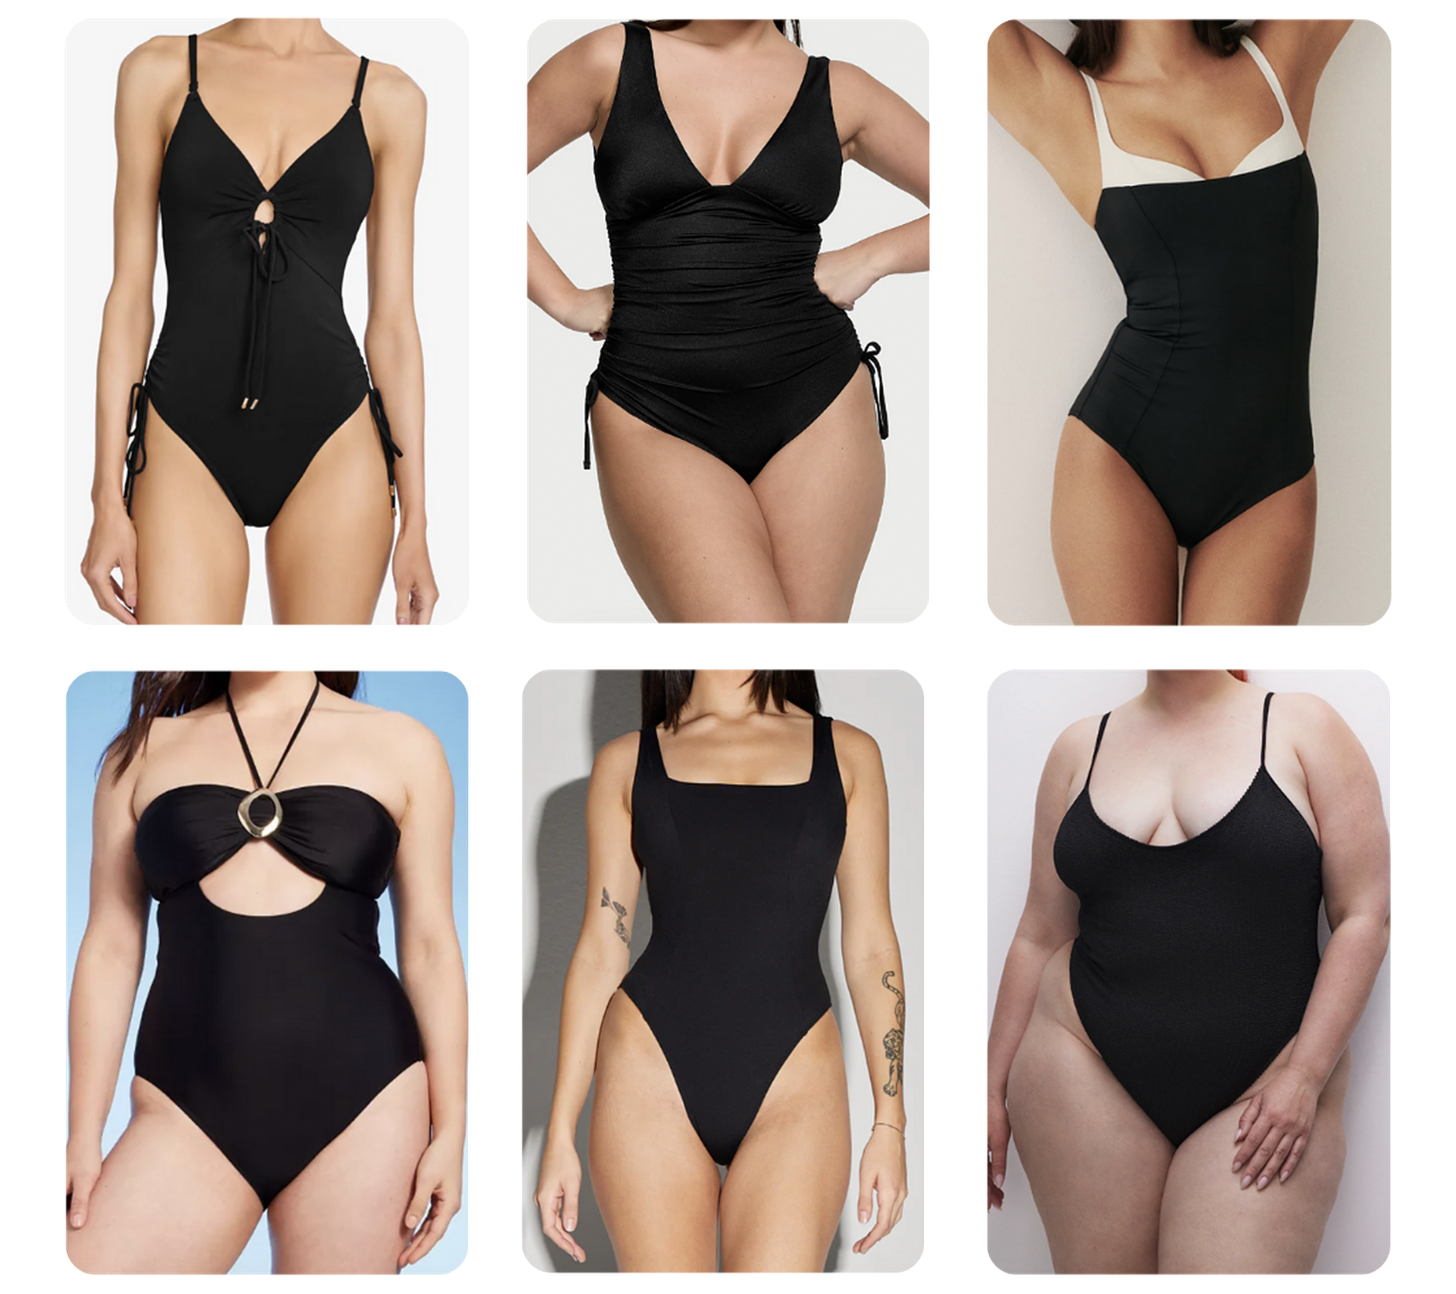 Images of various black one-piece swimsuits.